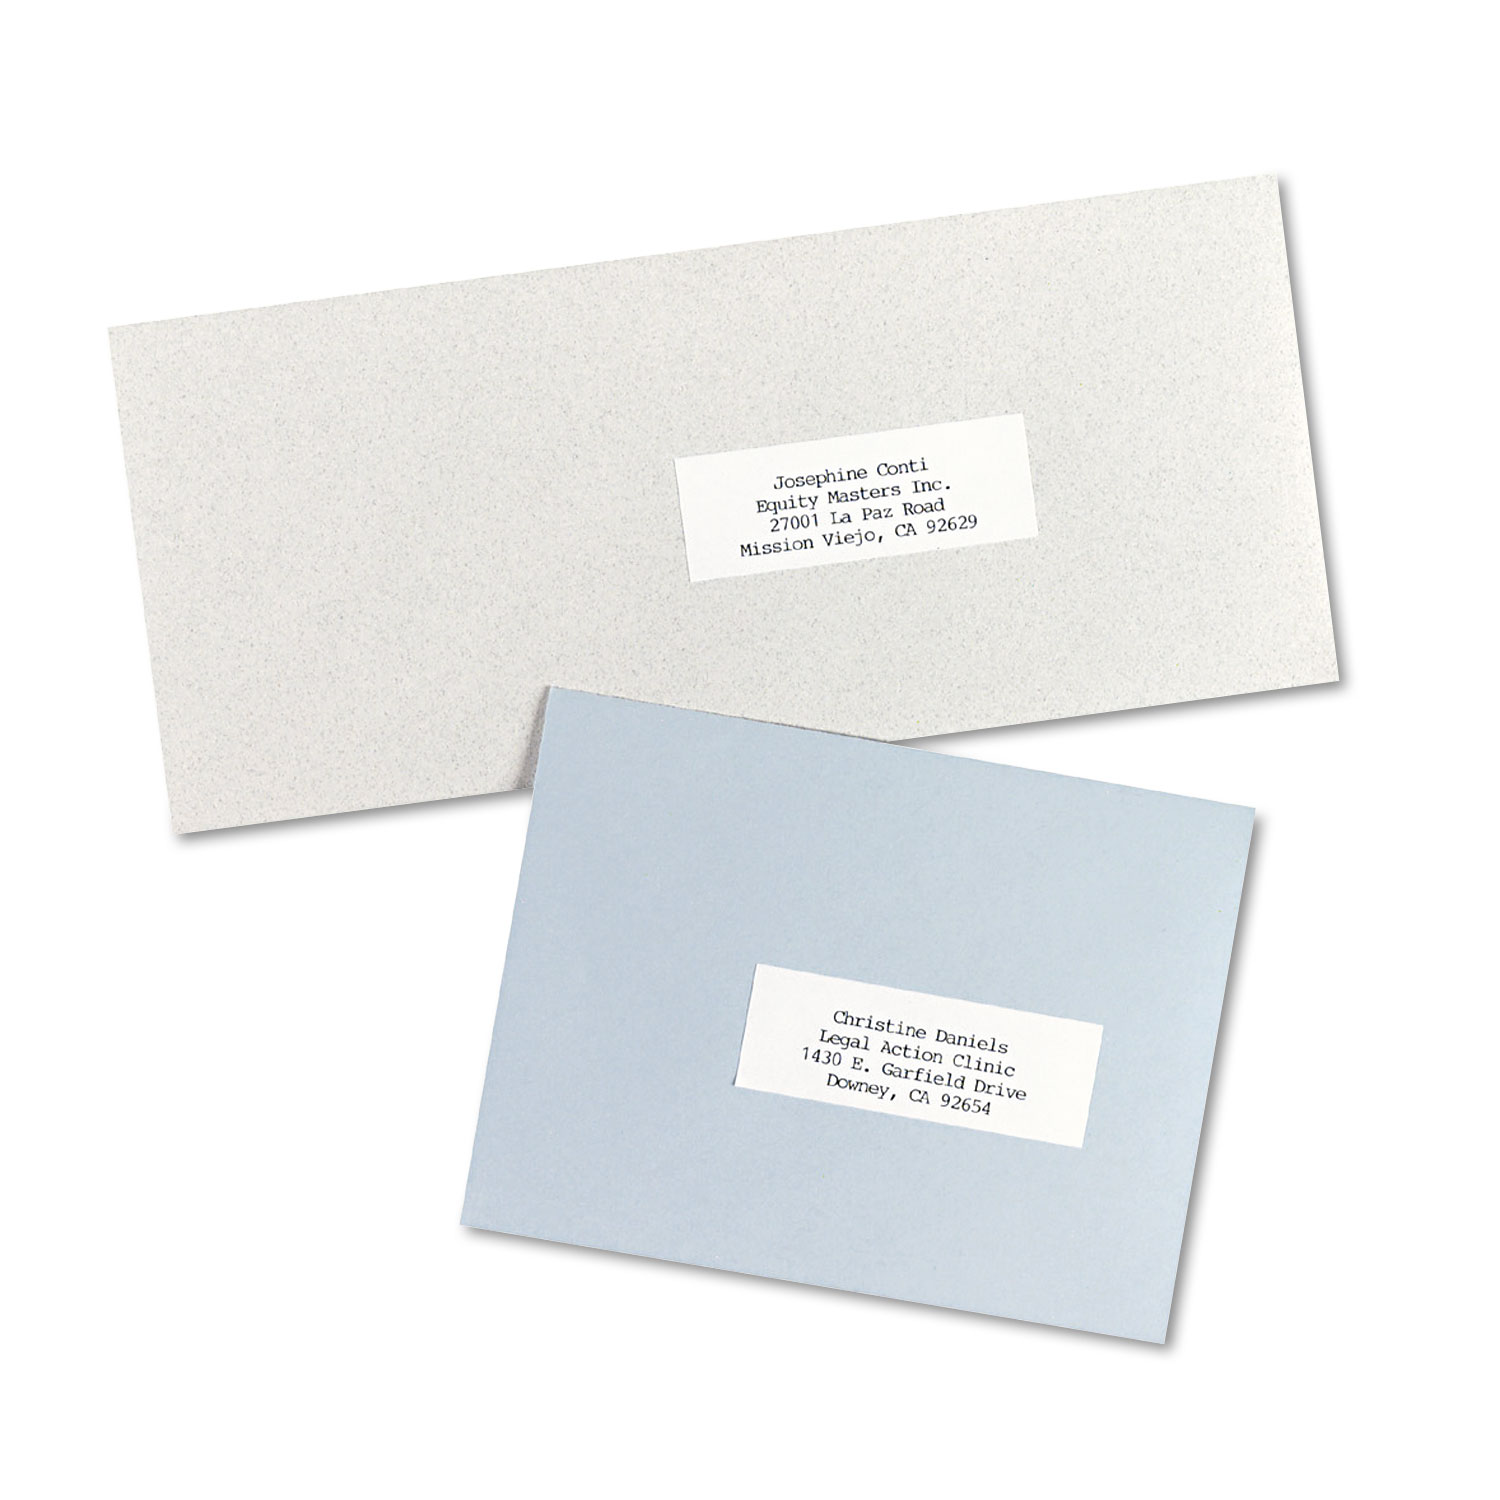  Avery 05332 Copier Mailing Labels, Copiers, 1 x 2.81, White, 33/Sheet, 250 Sheets/Box (AVE5332) 